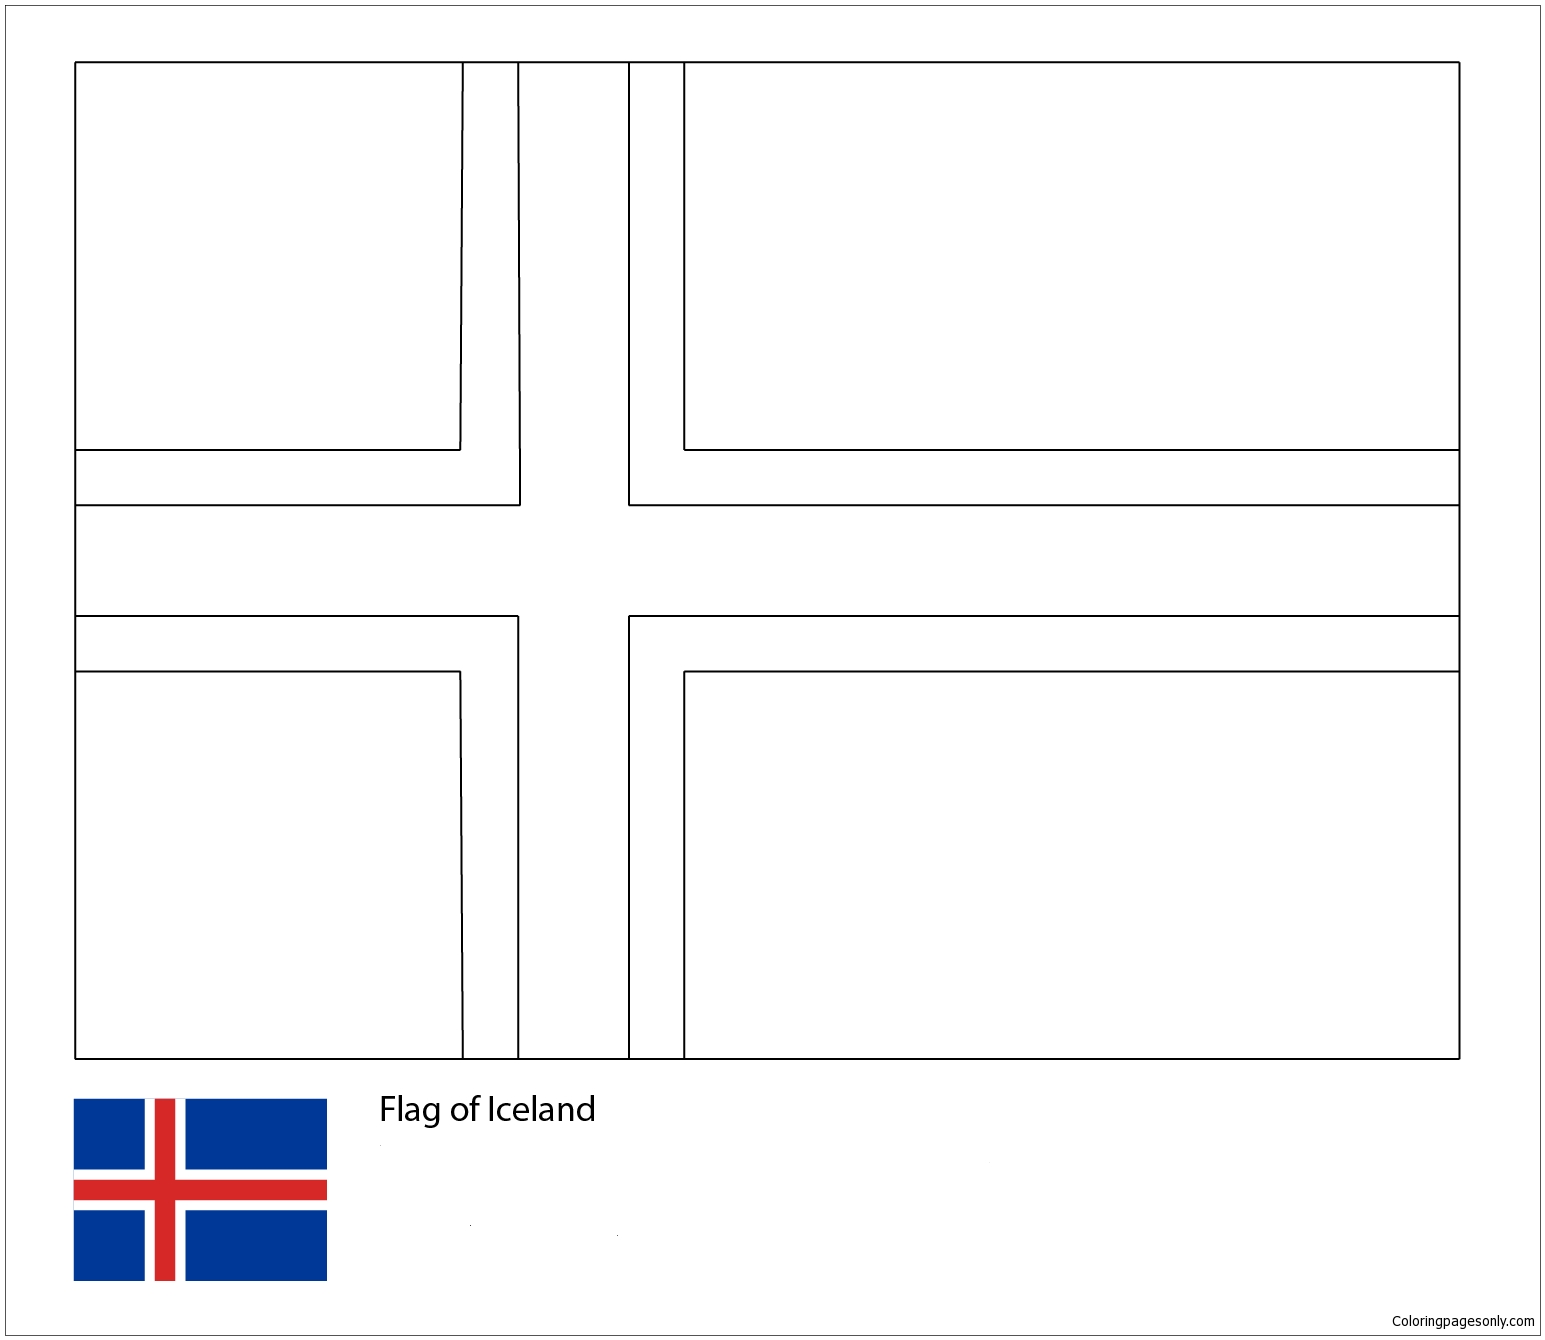 Flag of Iceland-World Cup 2018 from World Cup 2018 Flags